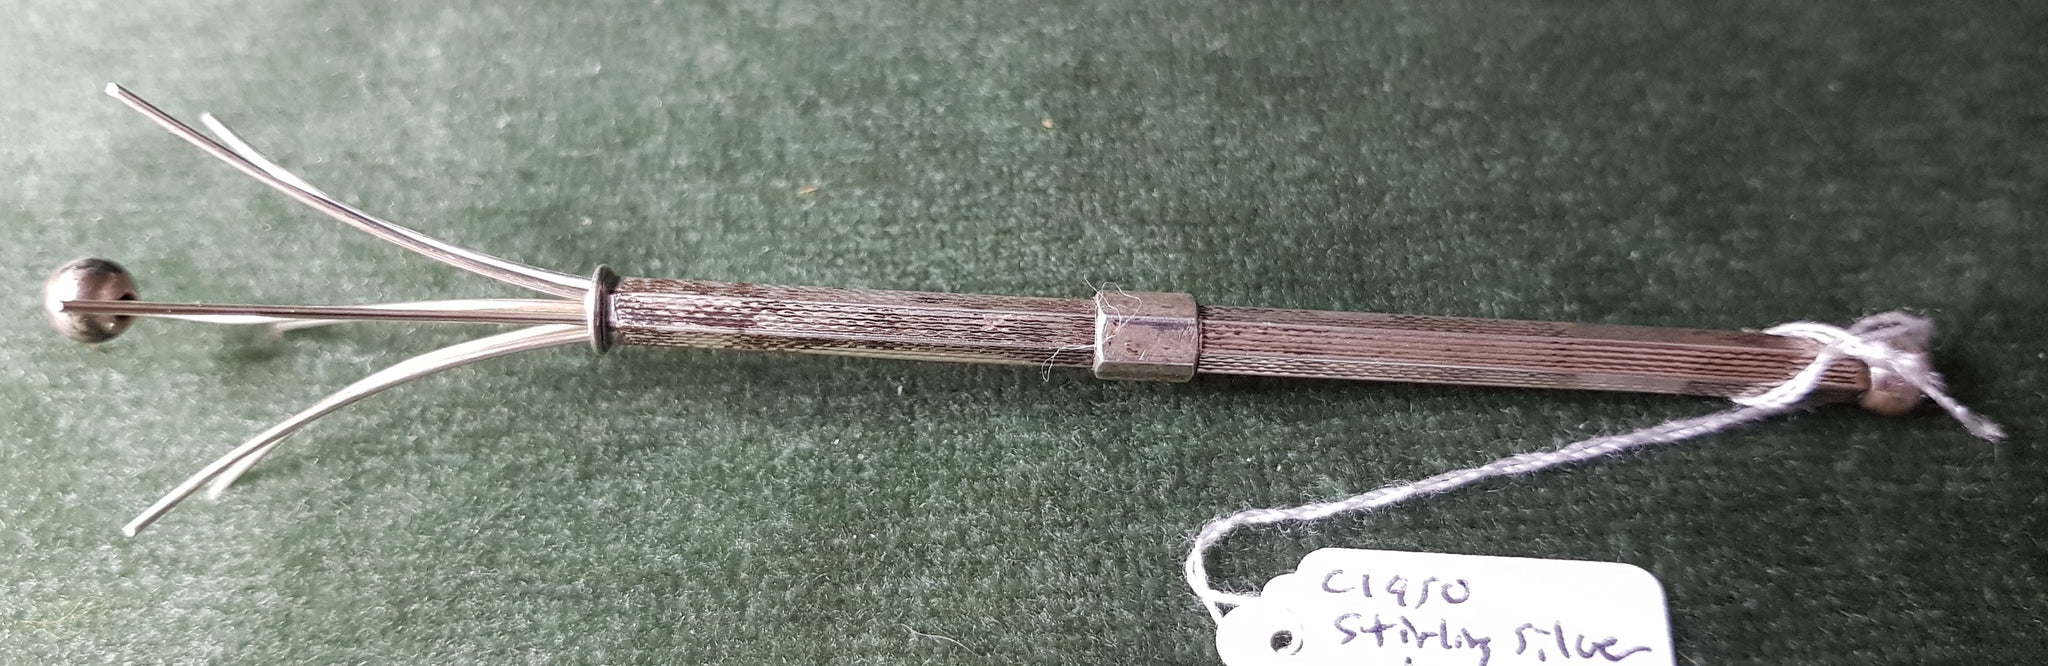 c1950 Sterling Silver cocktail swivel stick #356